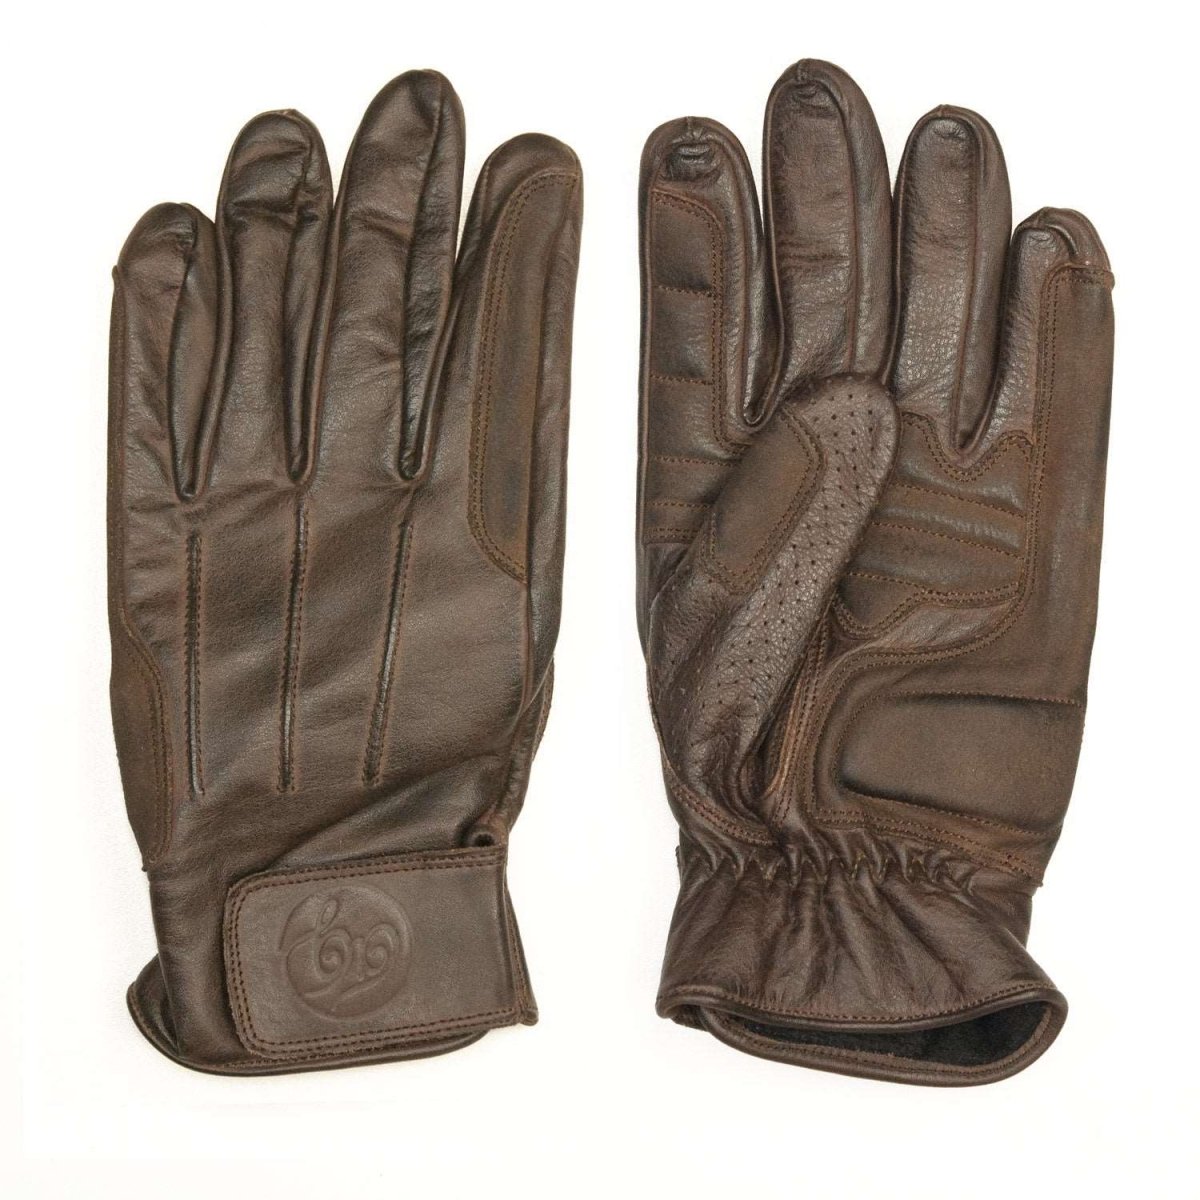 Age of Glory Rover Leather CE Waxed Gloves in Brown